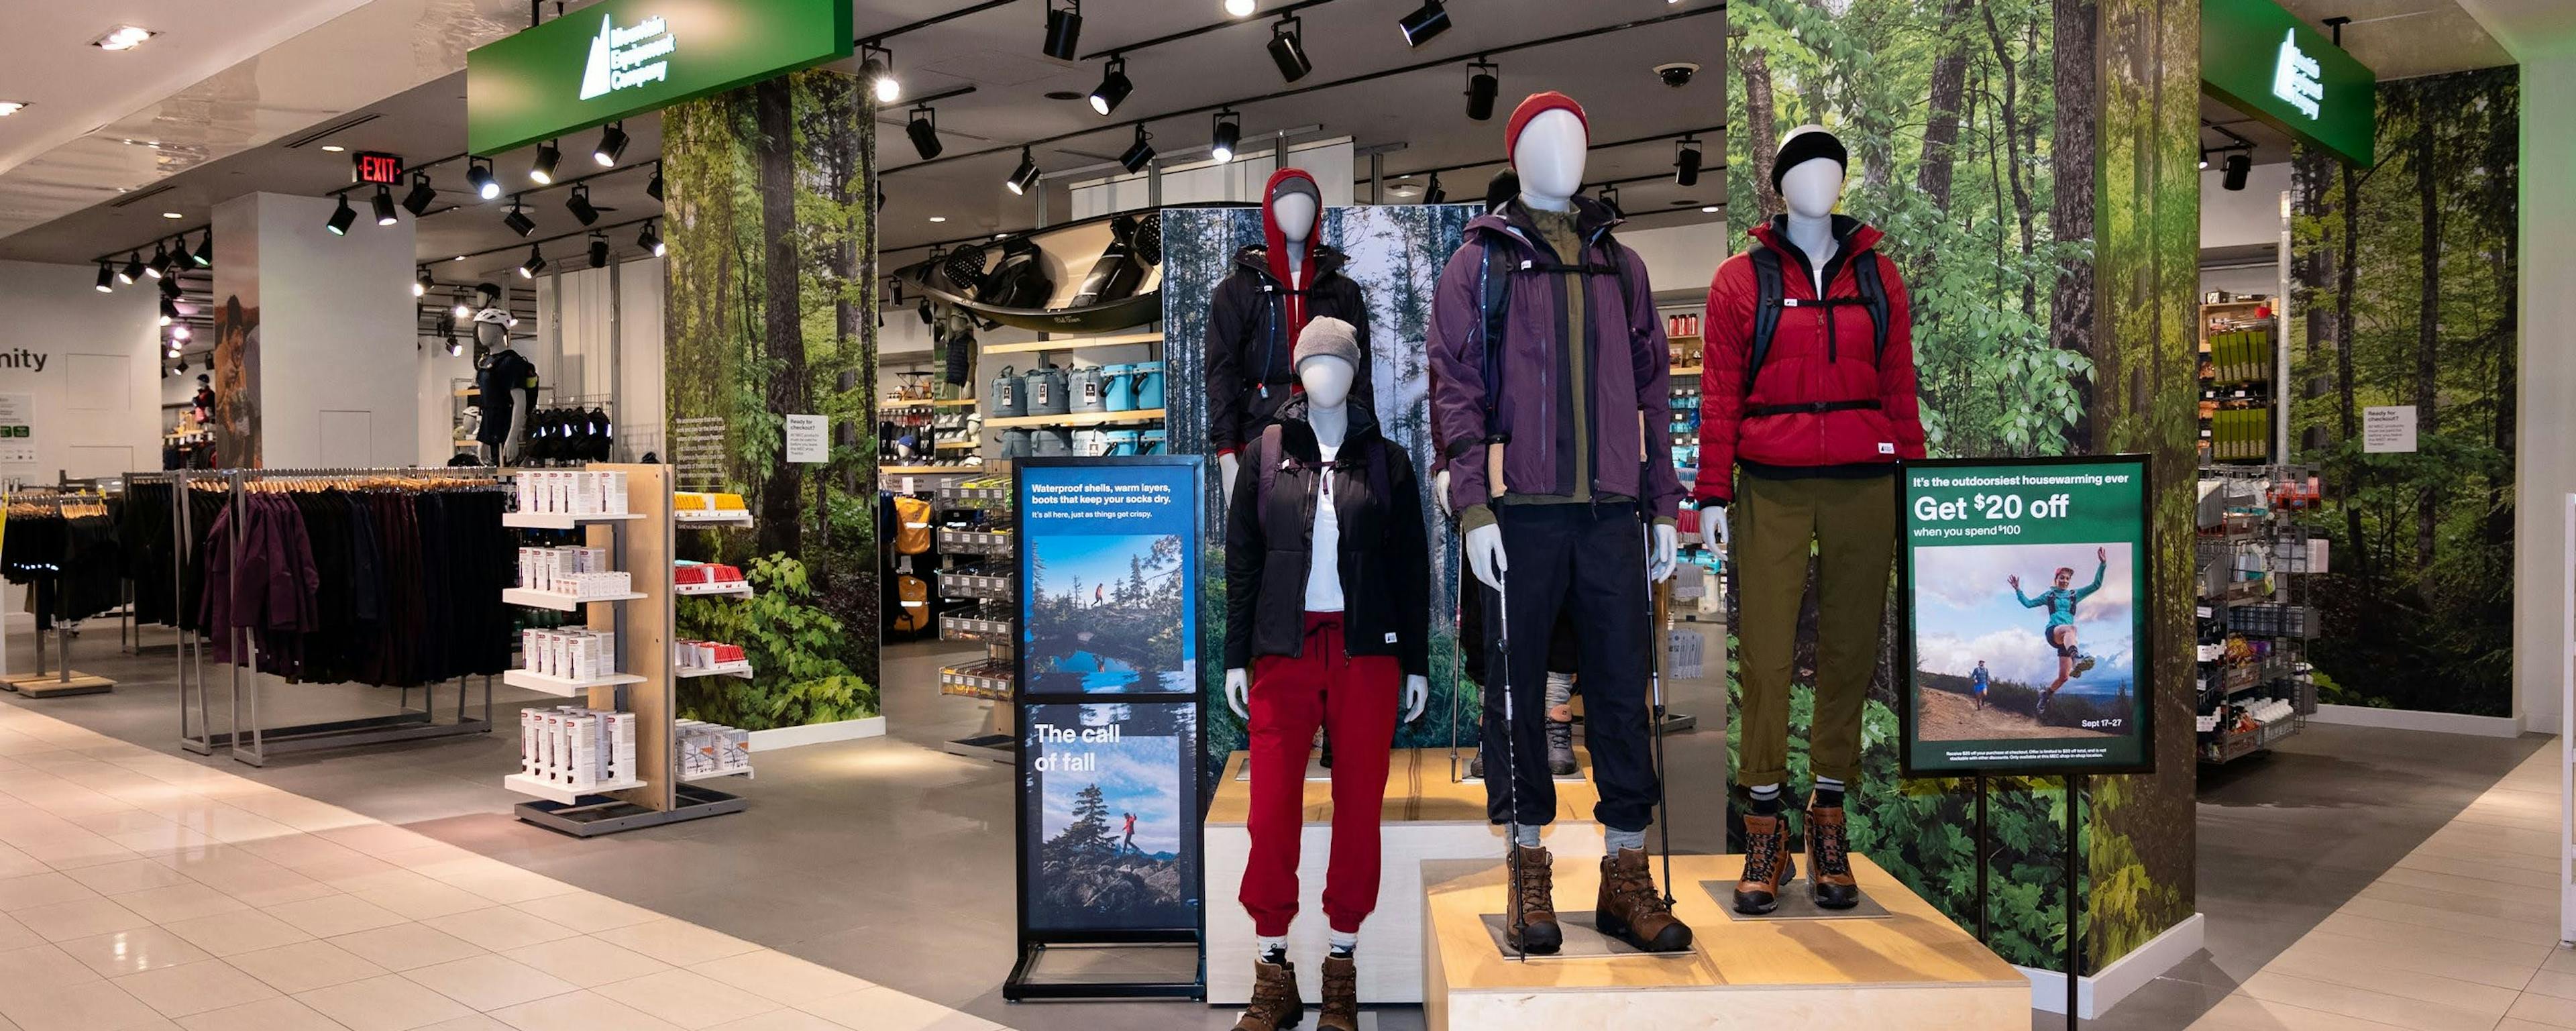 If you love trails, snow, water or fresh air, this is your store. Visit MEC Eaton Center for outdoor gear, know-how and inspiration.